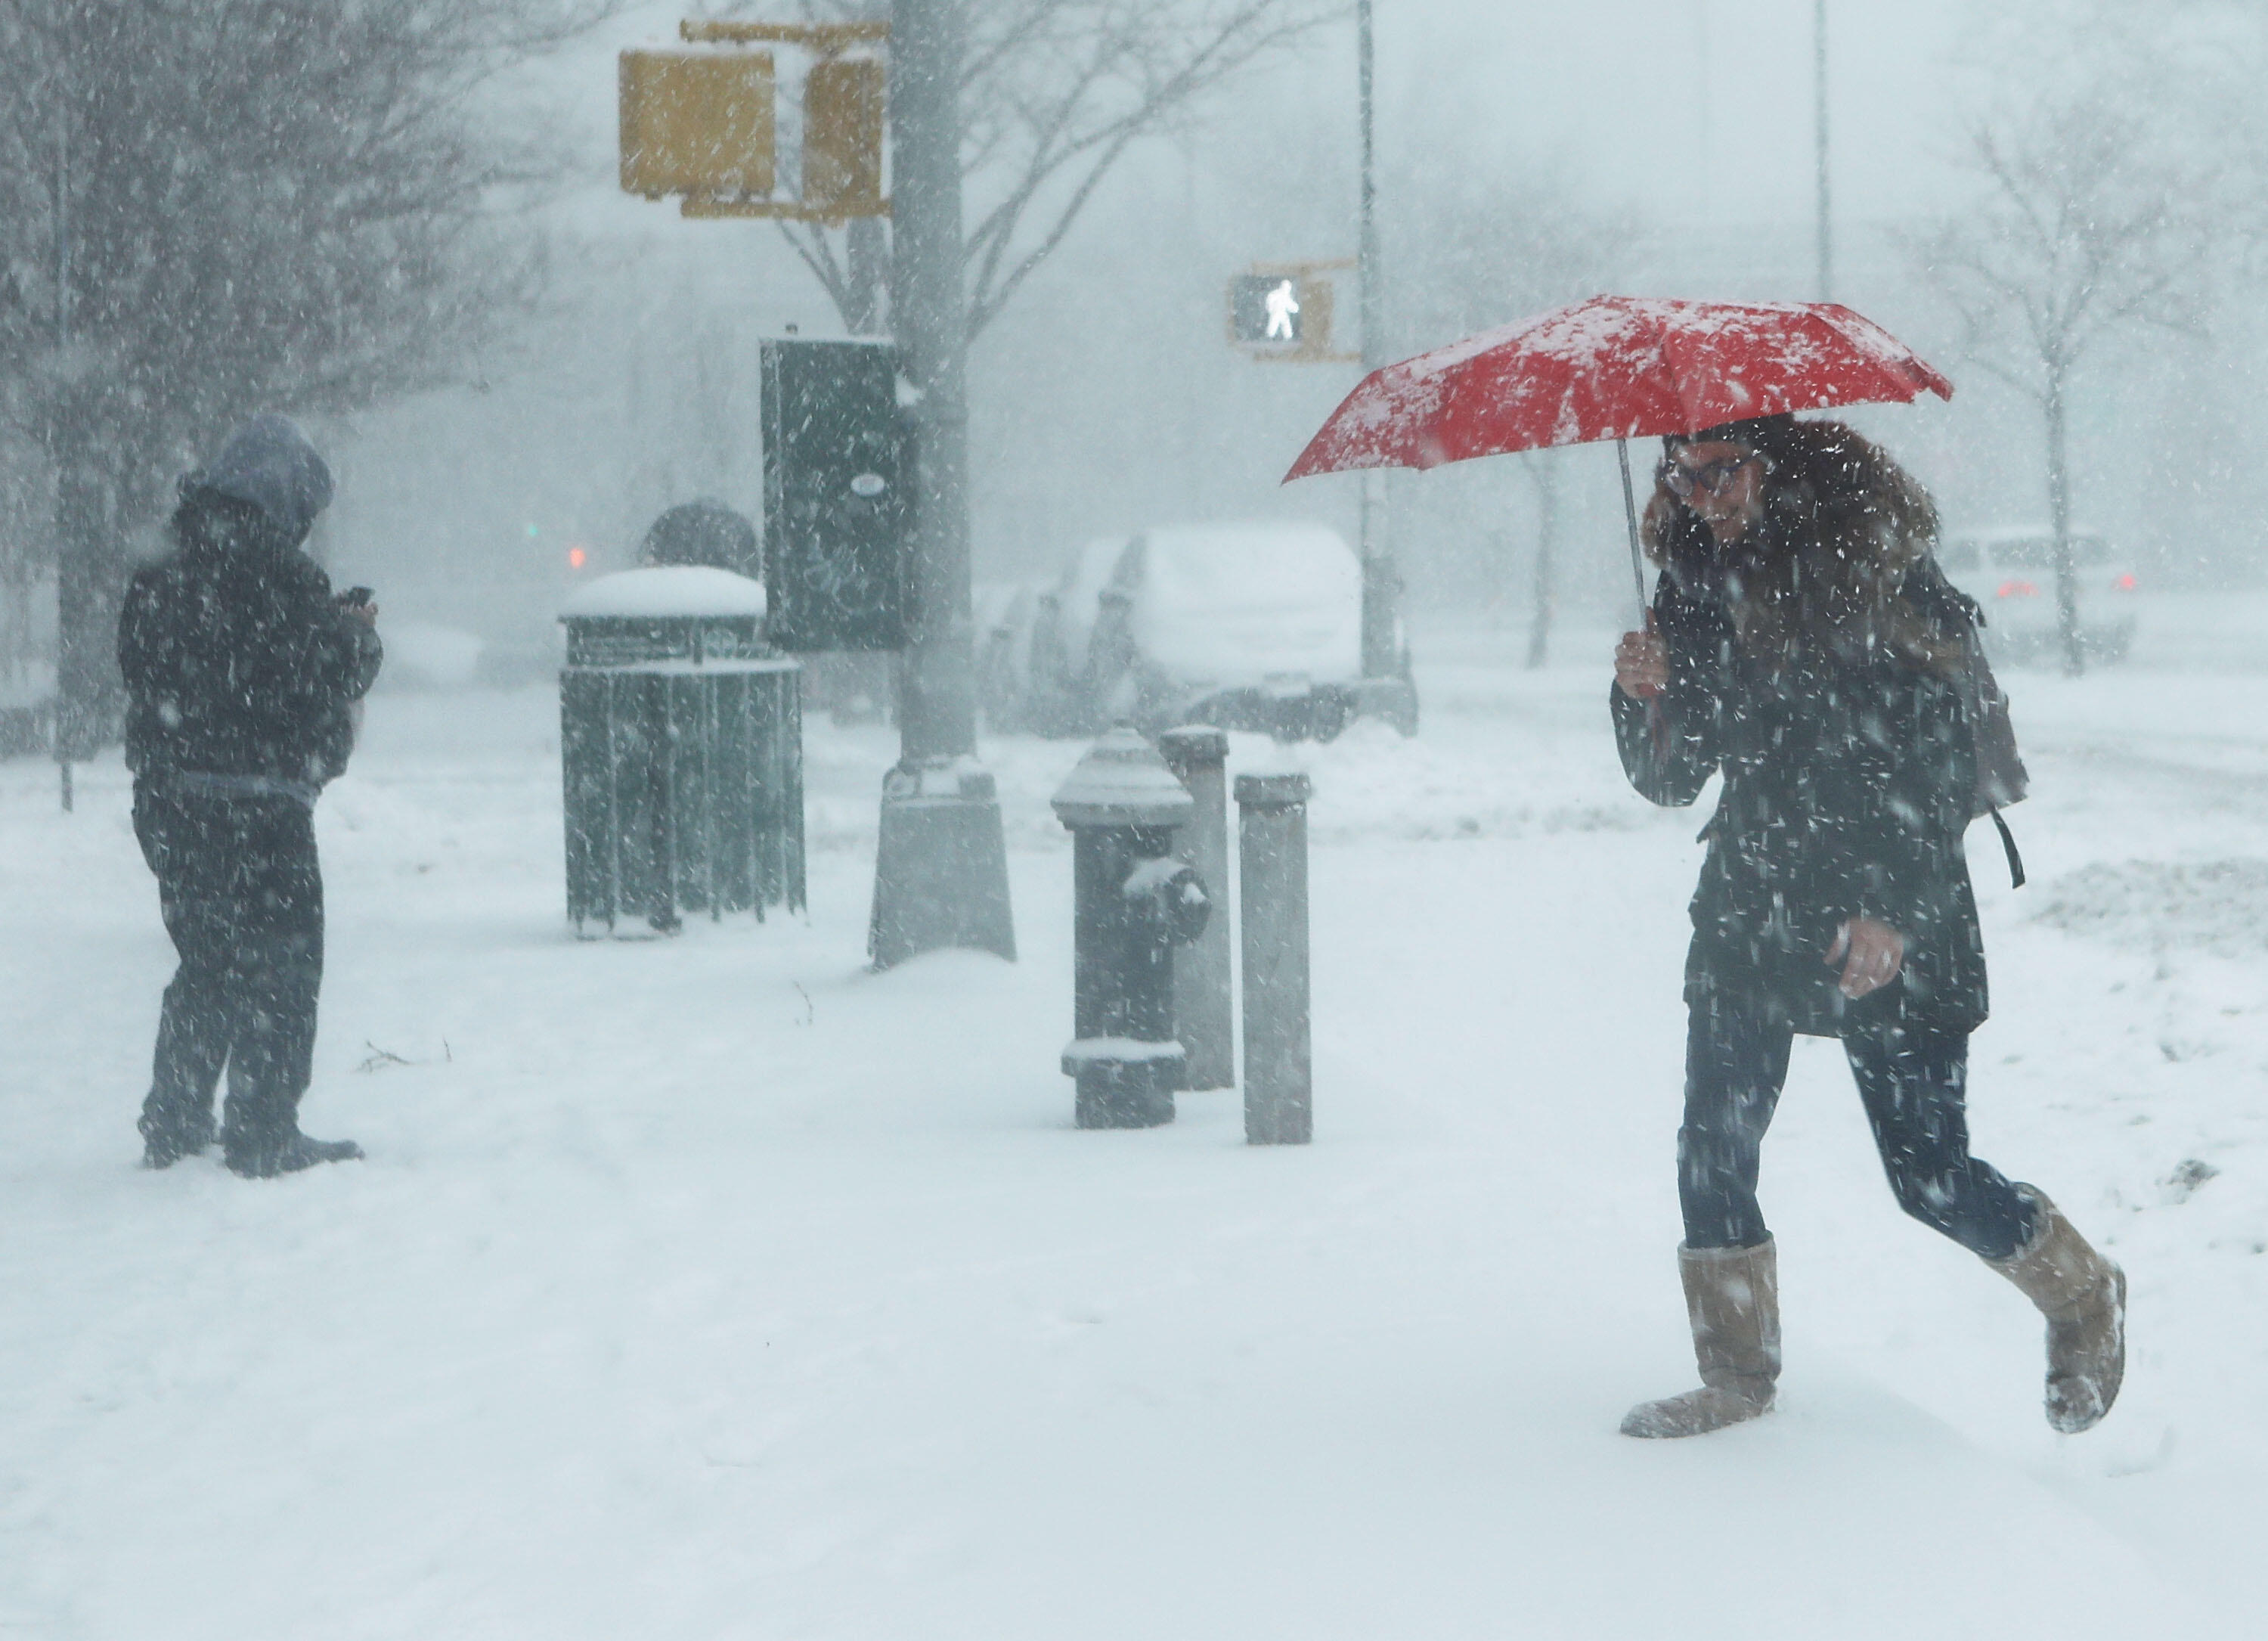 NEW YORK, NY - FEBRUARY 09:  Pedestrians walk in the snow and wind on February 9, 2017 in the Brooklyn borough of New York City. A major winter storm warning is forecast from Pennsylvania to Maine with the New York City area expected to receive up to one 